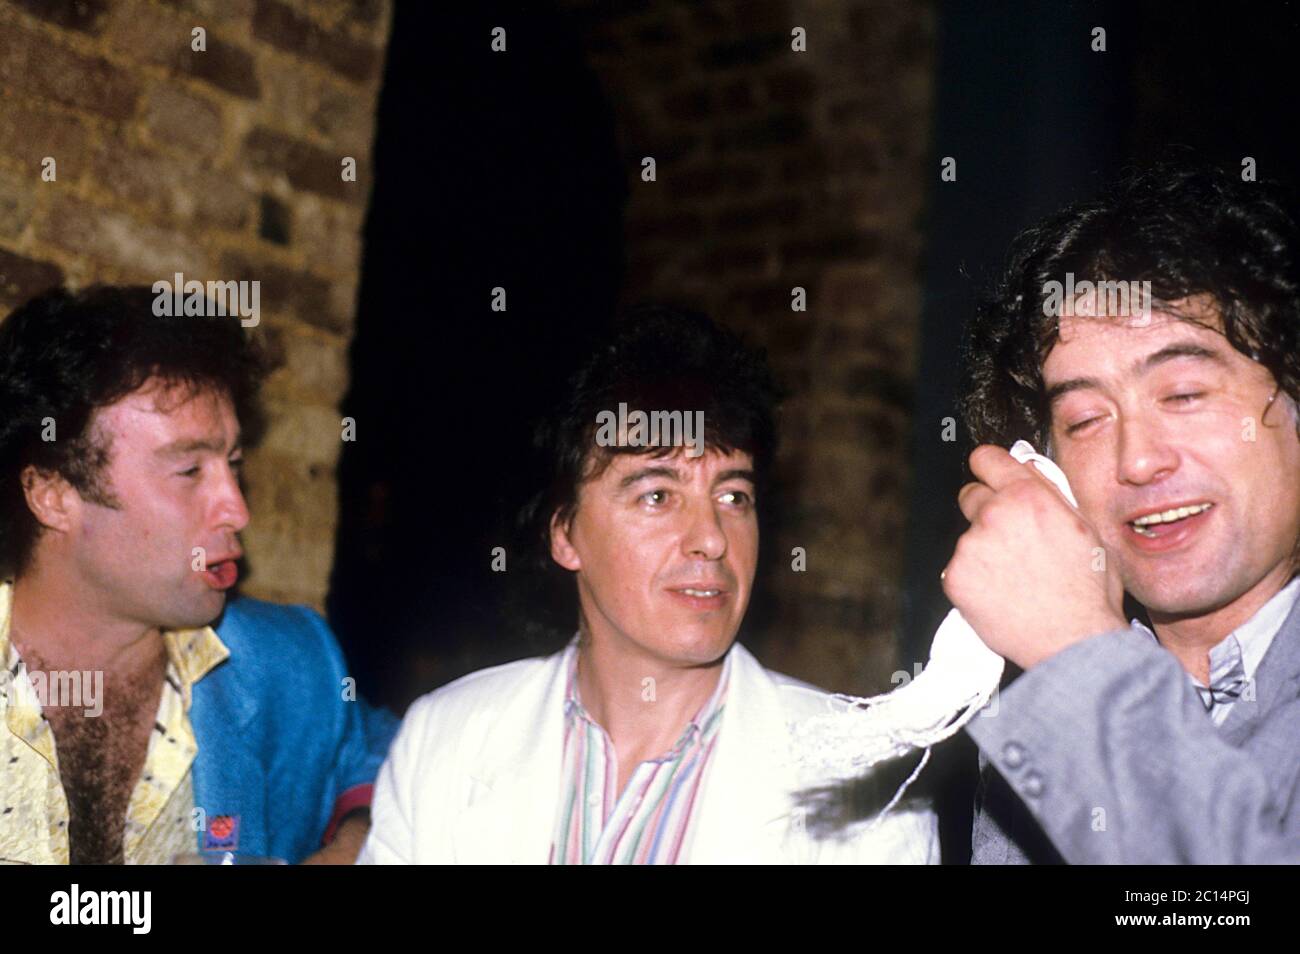 Paul Rodgers, Bill Wyman and Jimmy Page of Willie and the Poor Boys at a press event. London, April 18, 1985 | usage worldwide Stock Photo